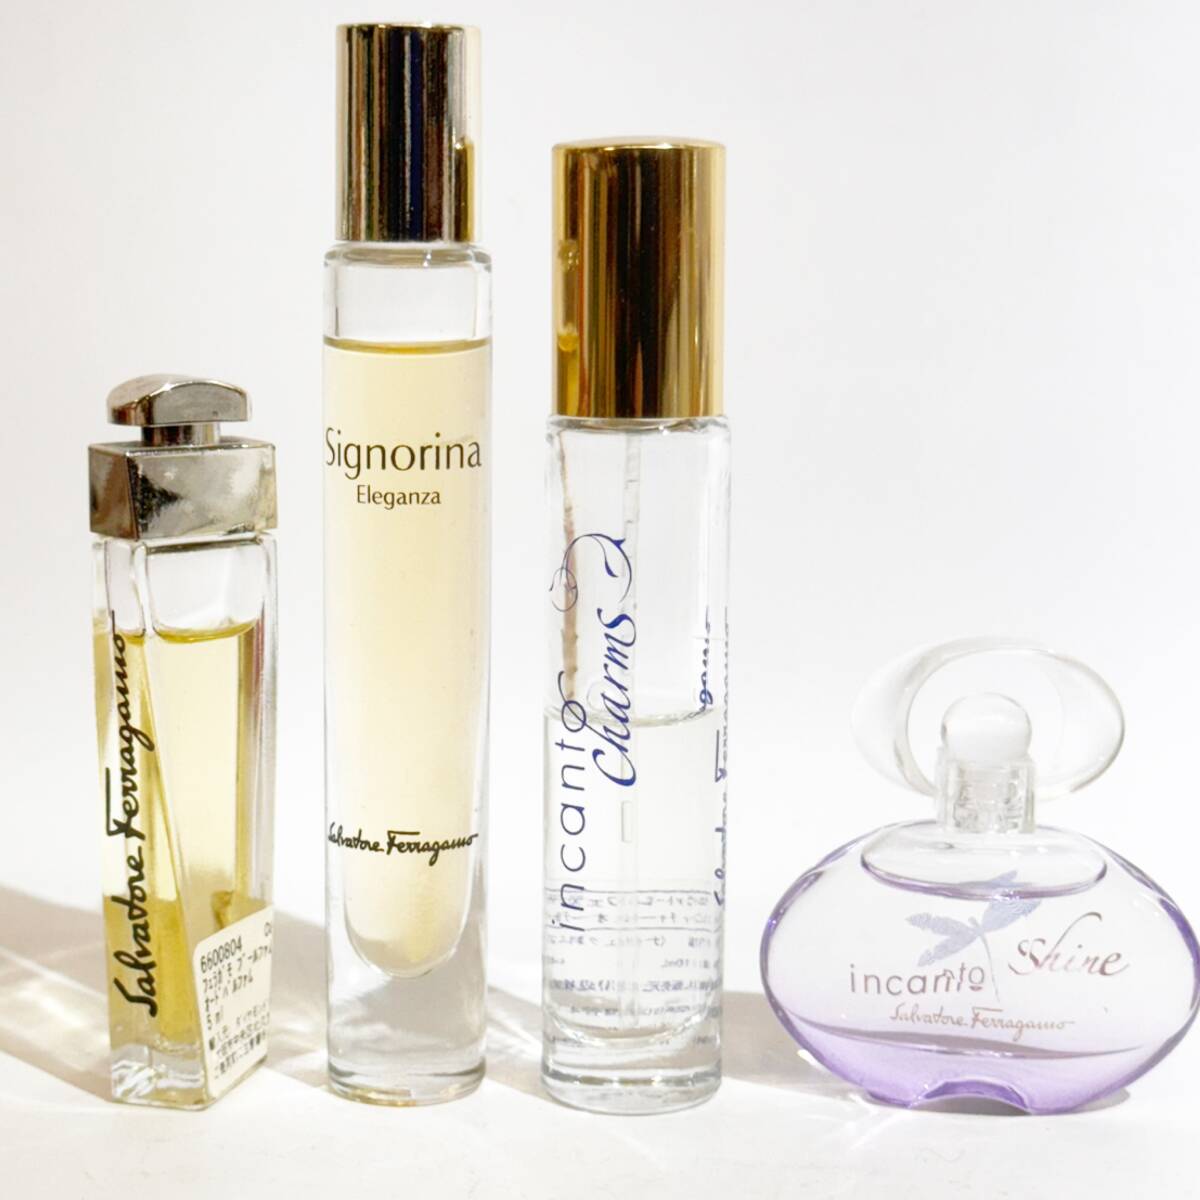  Salvatore Ferragamo * perfume set * in can to charm, in can to Bliss, in can to car in, pool fam, body lotion 